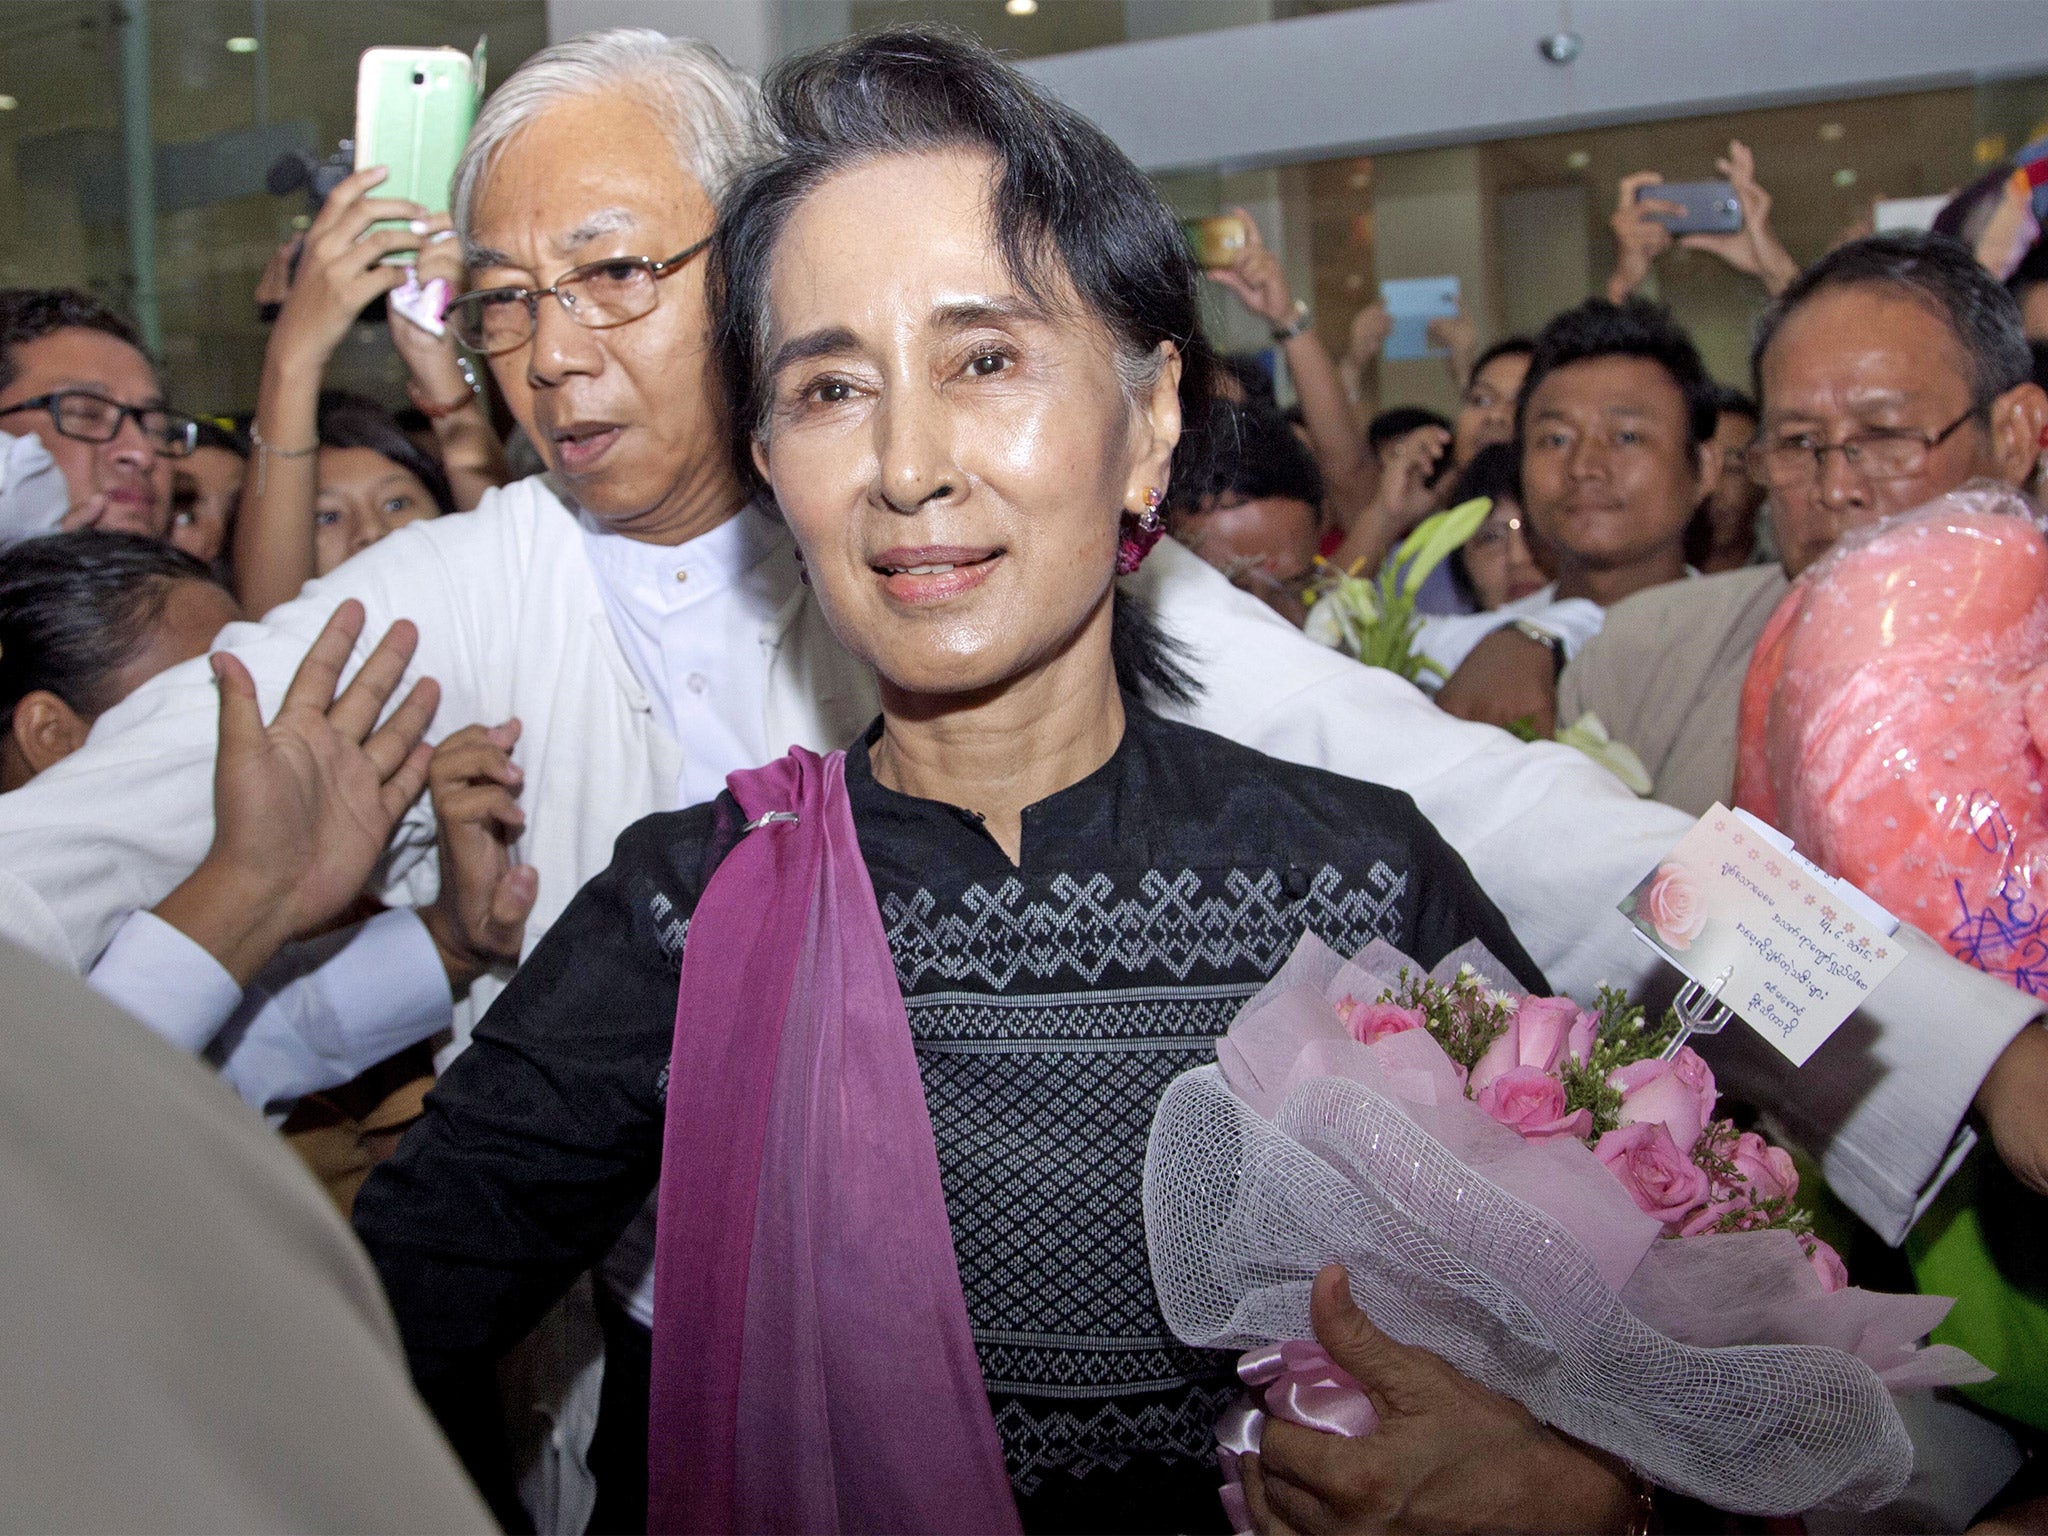 In opposition, Aung San Suu Kyi has been hugely popular. But can she retain her party’s appeal in government?